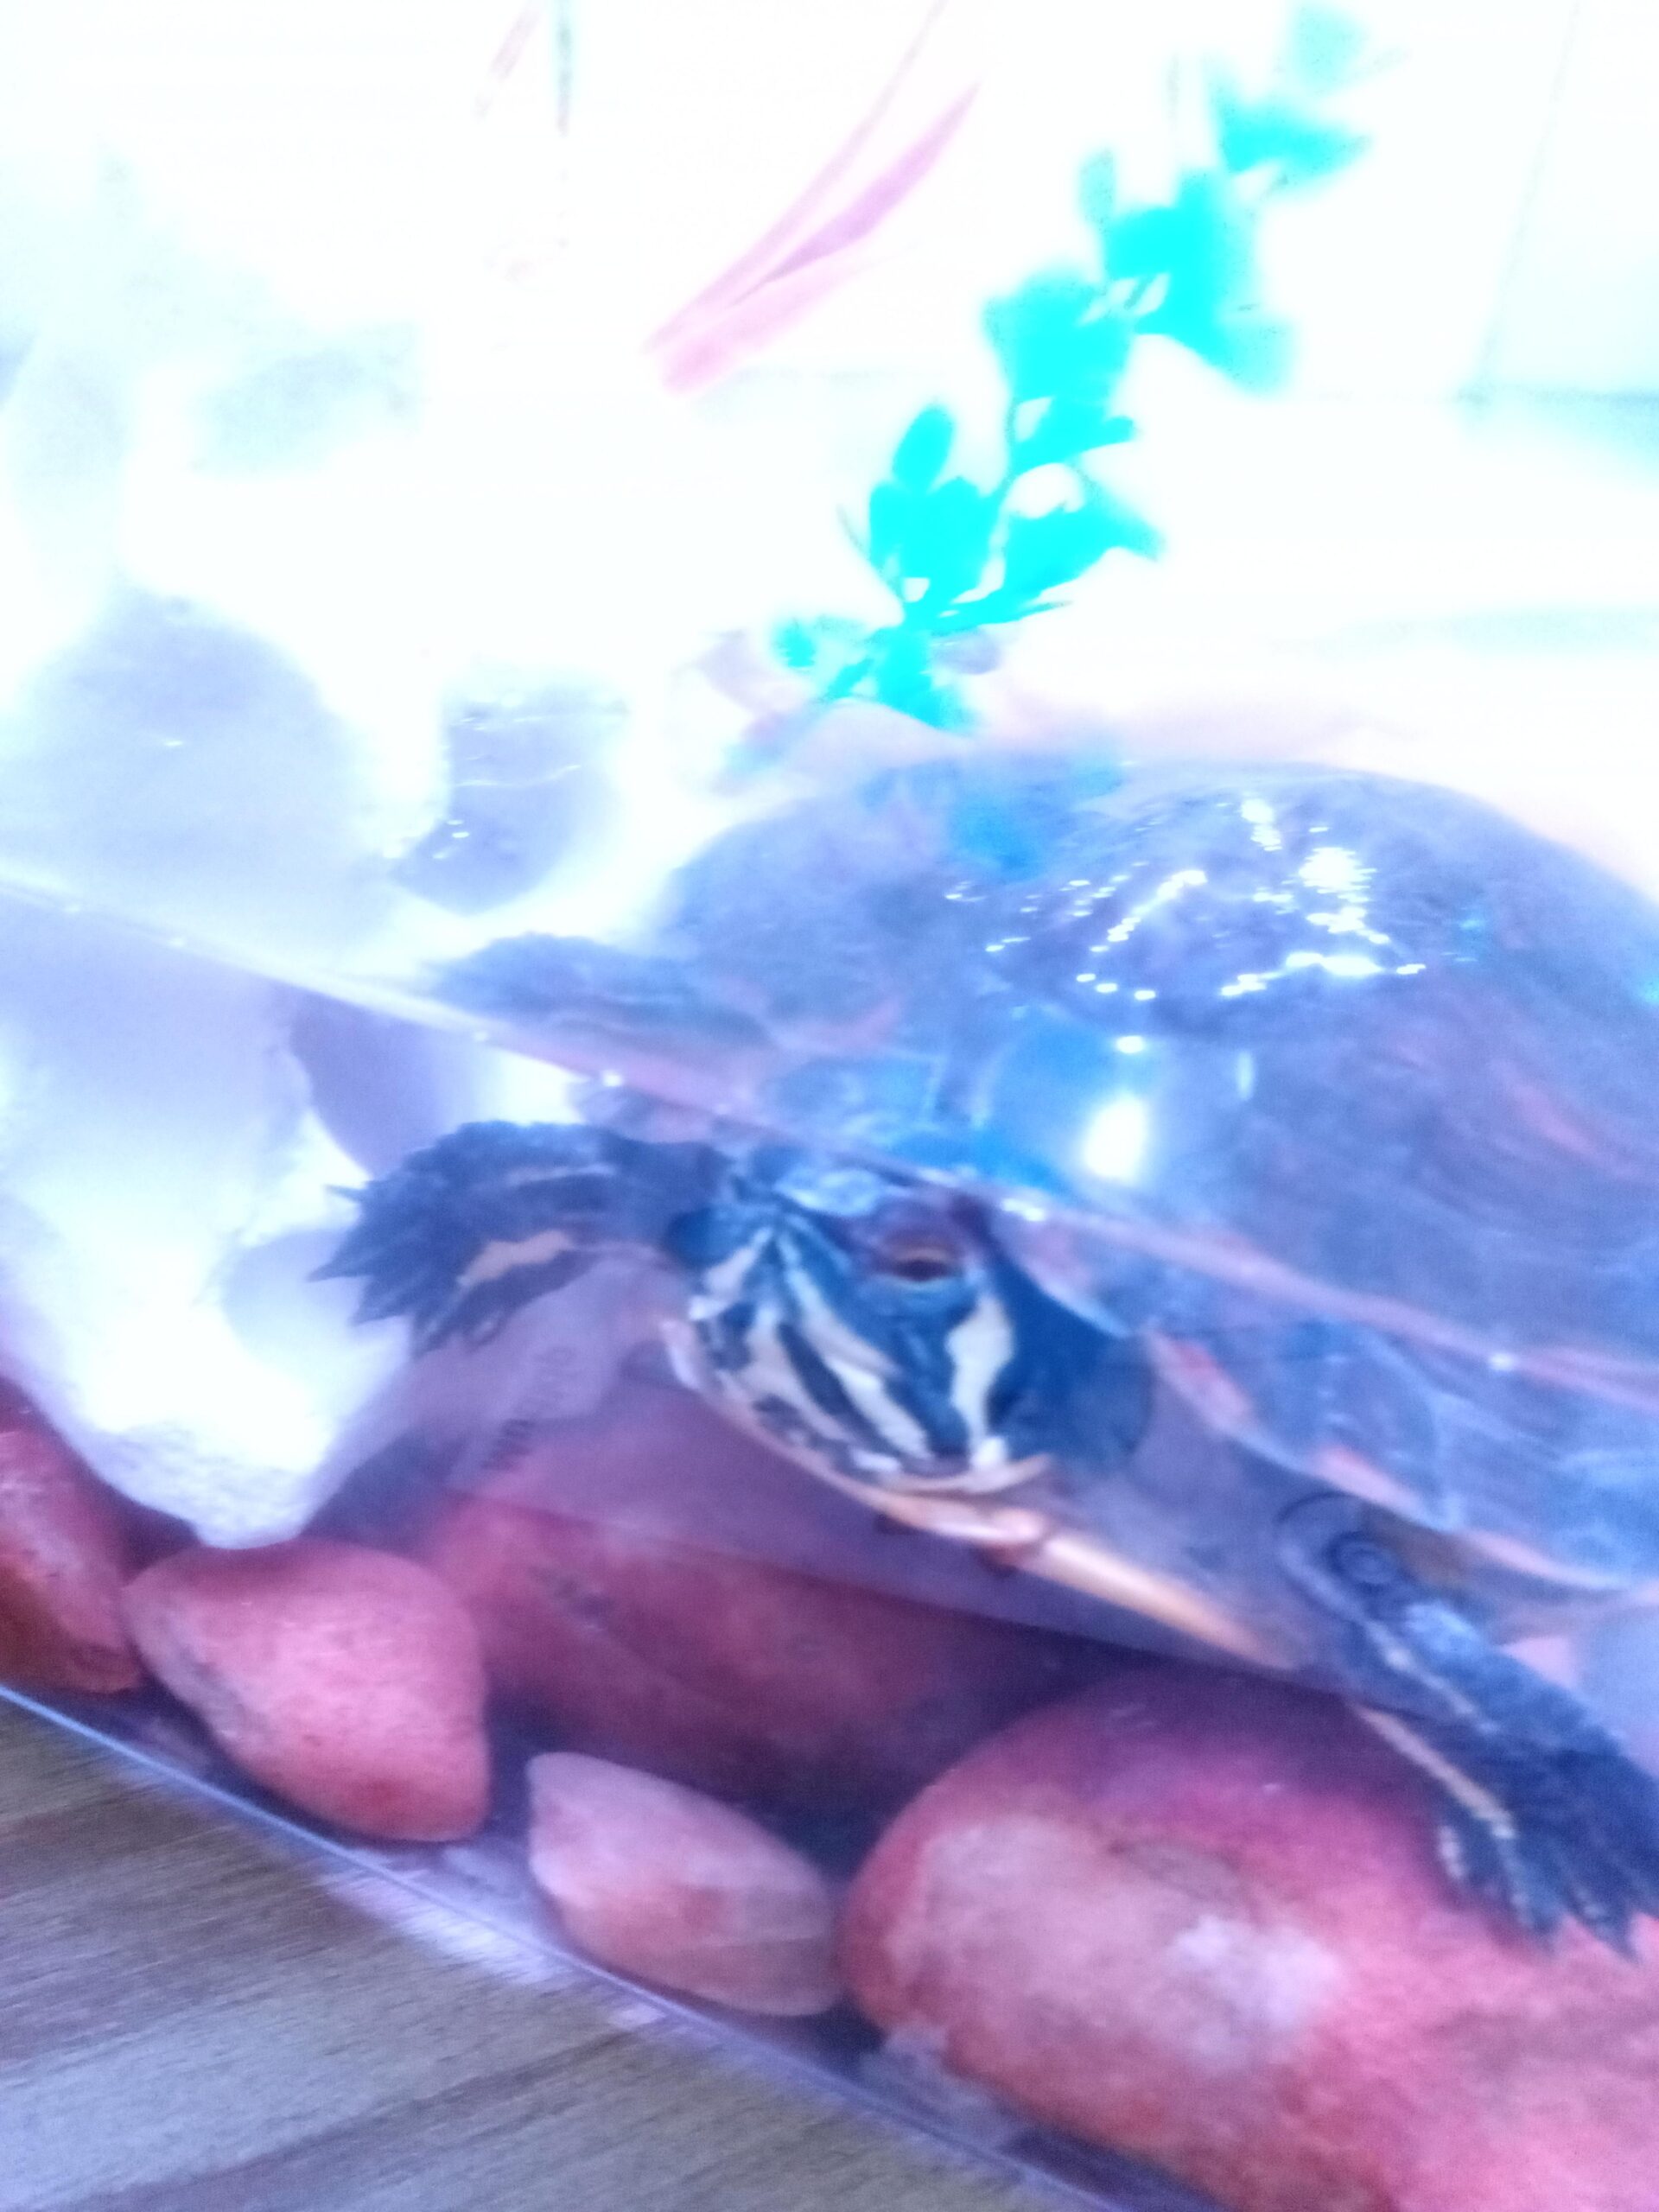 How Do I Know If My Turtle is Happy?